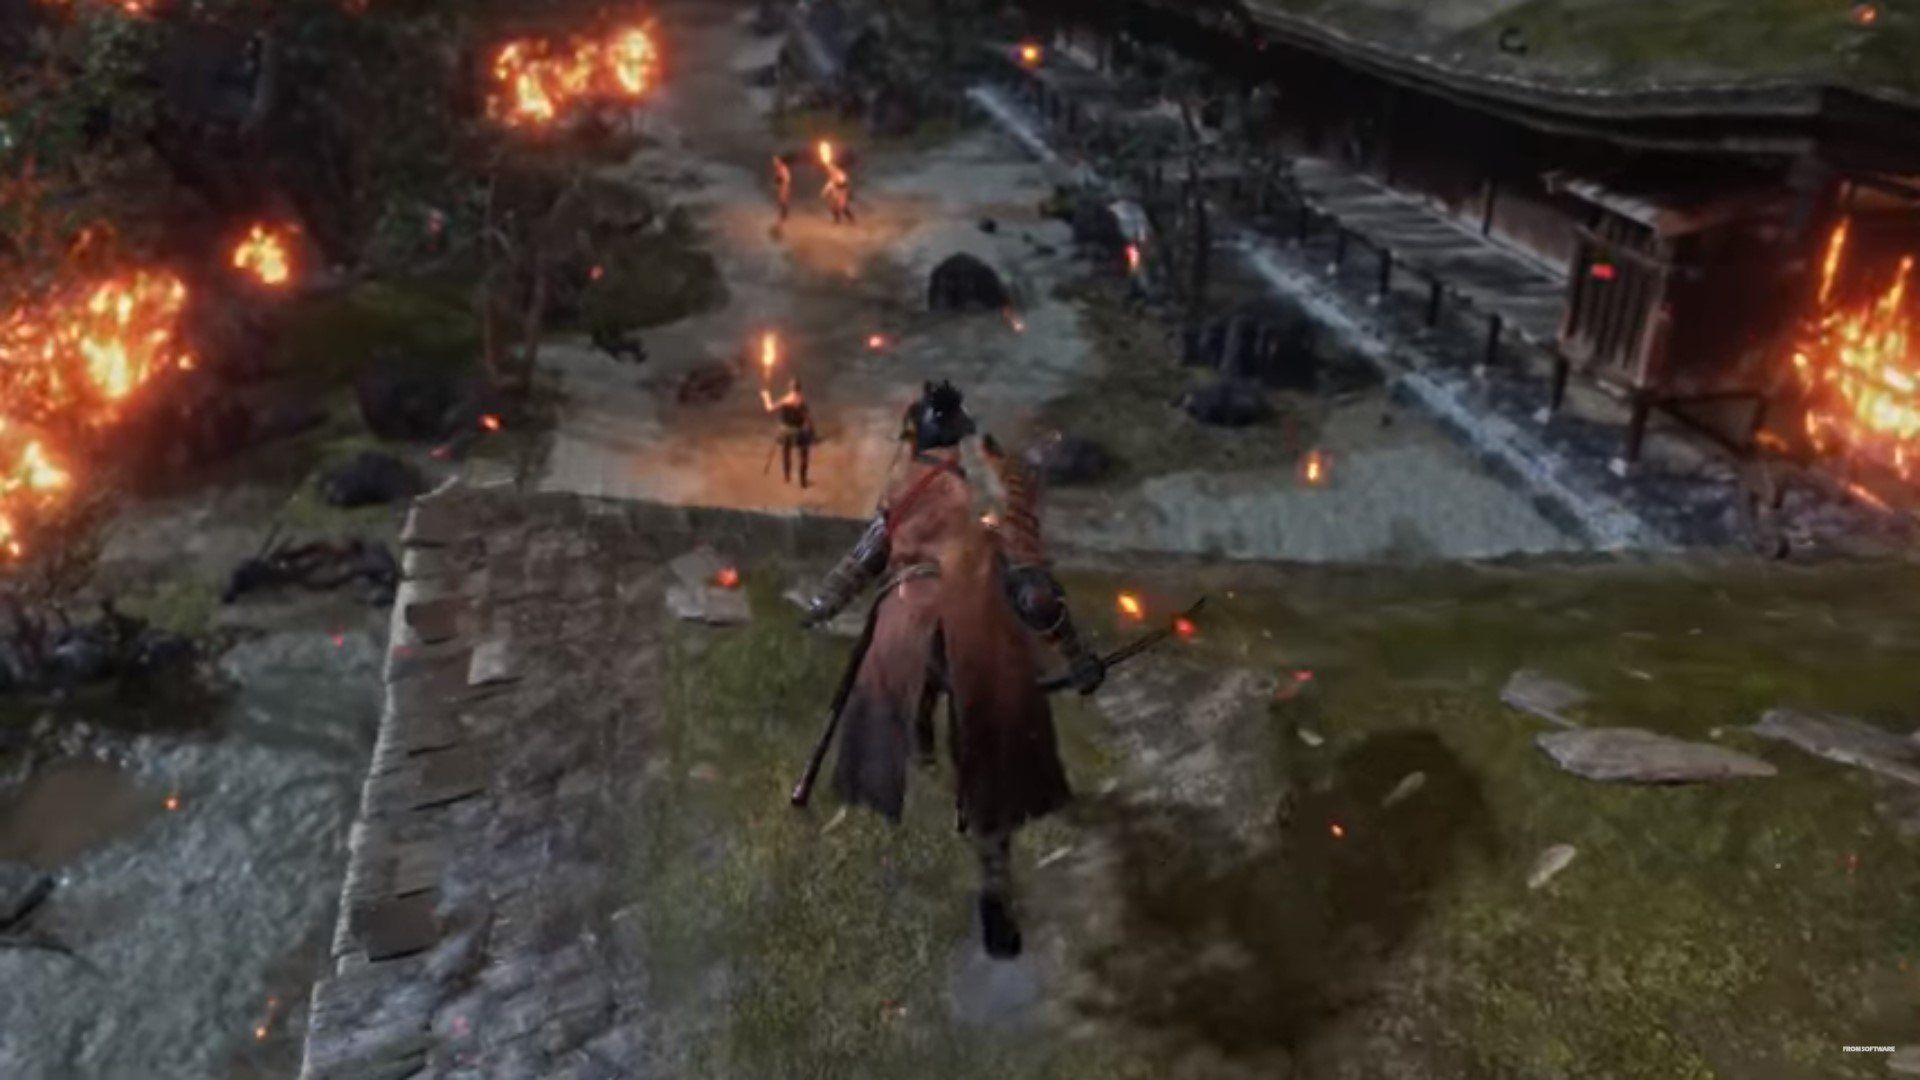 Sekiro Shadows Die Twice PS4 Details Suggest Stealth Is an Option